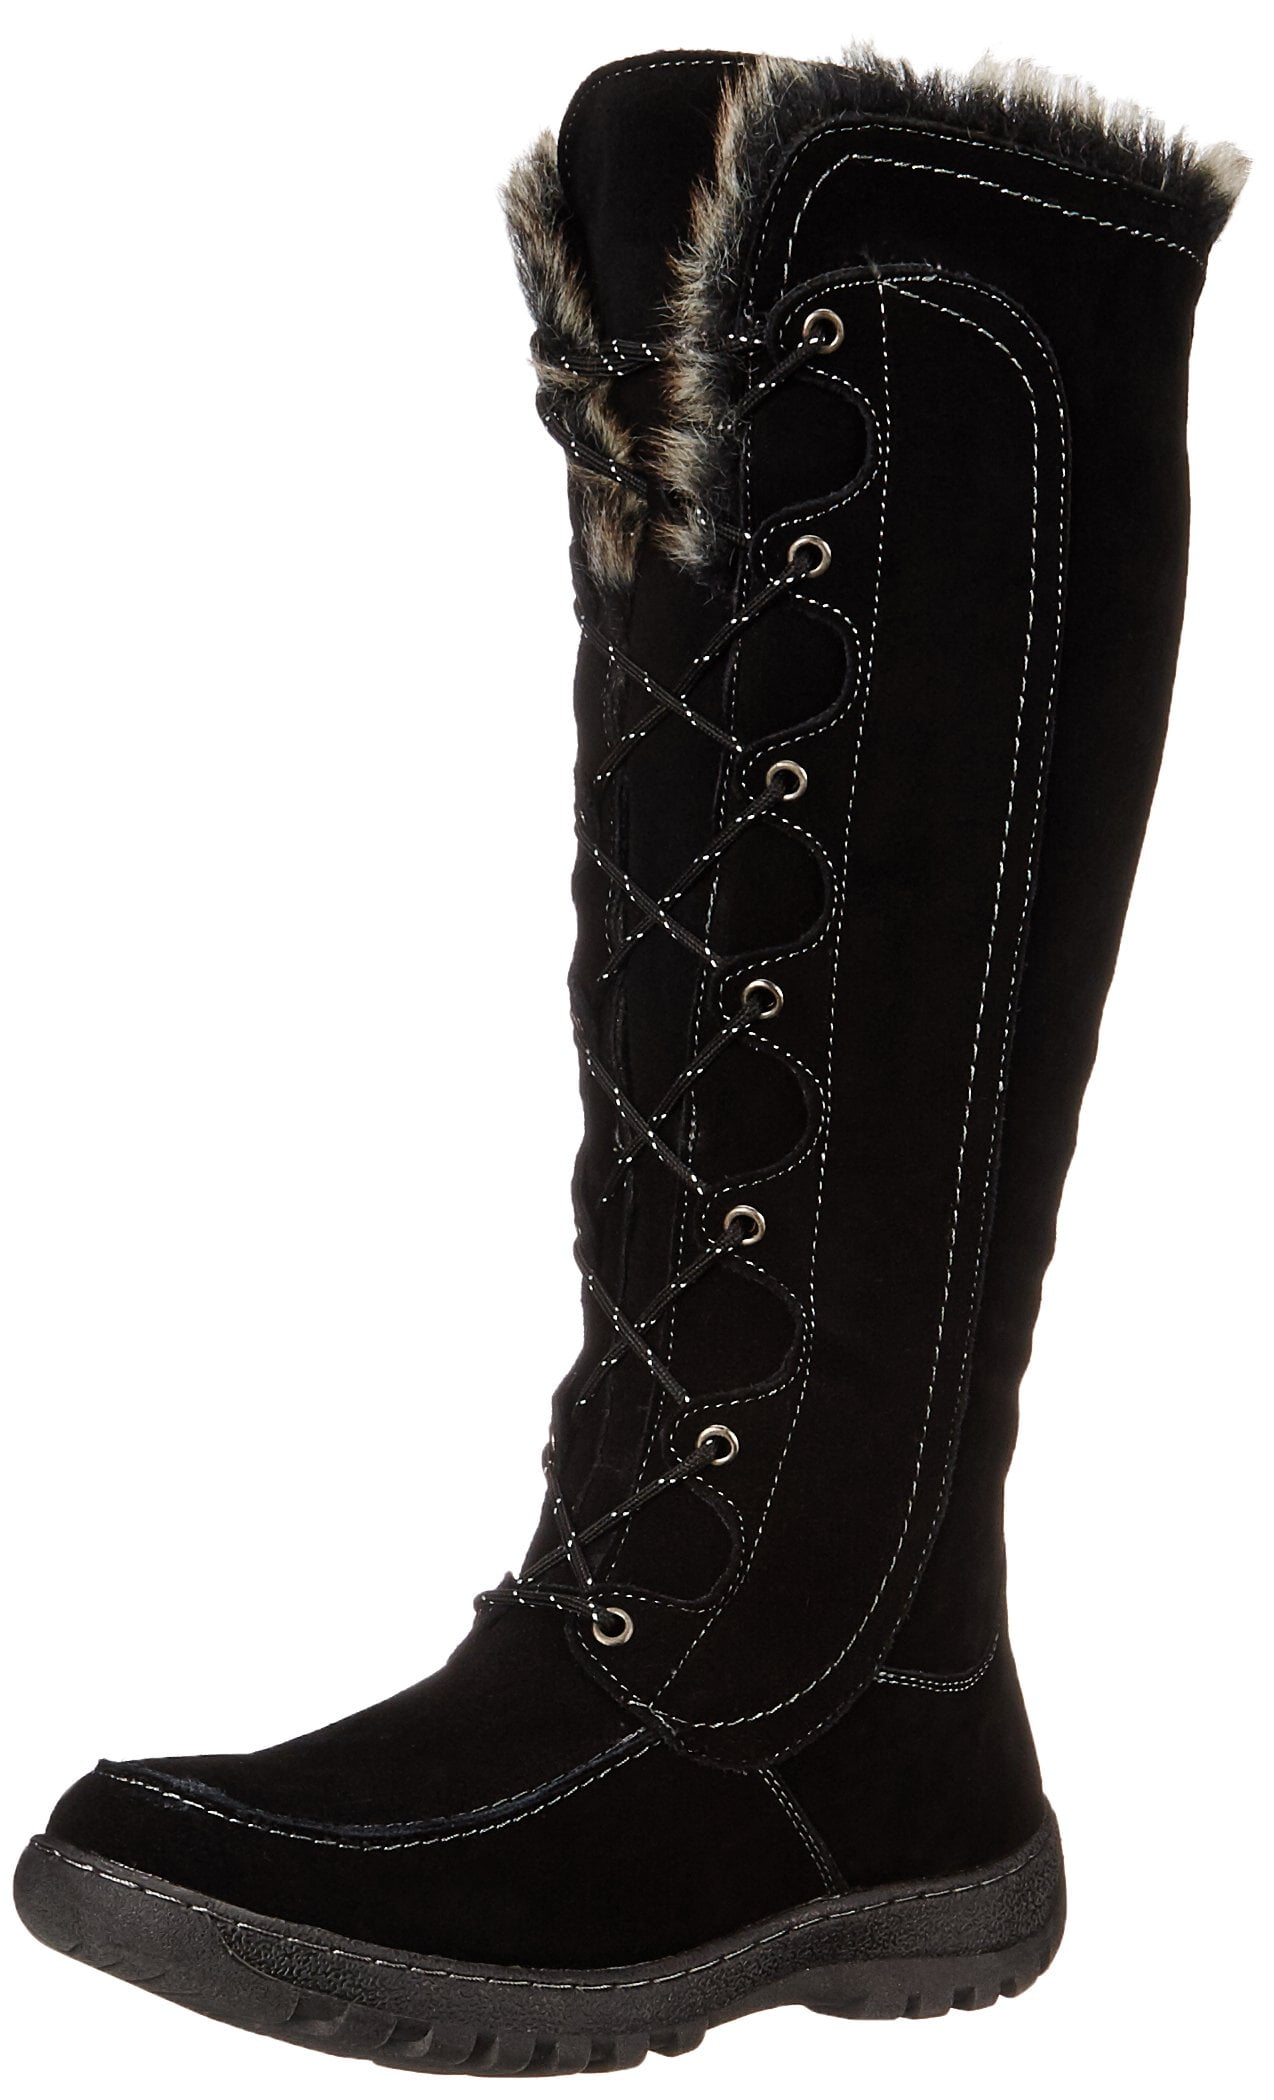 Buy > hawkins riding boots > in stock